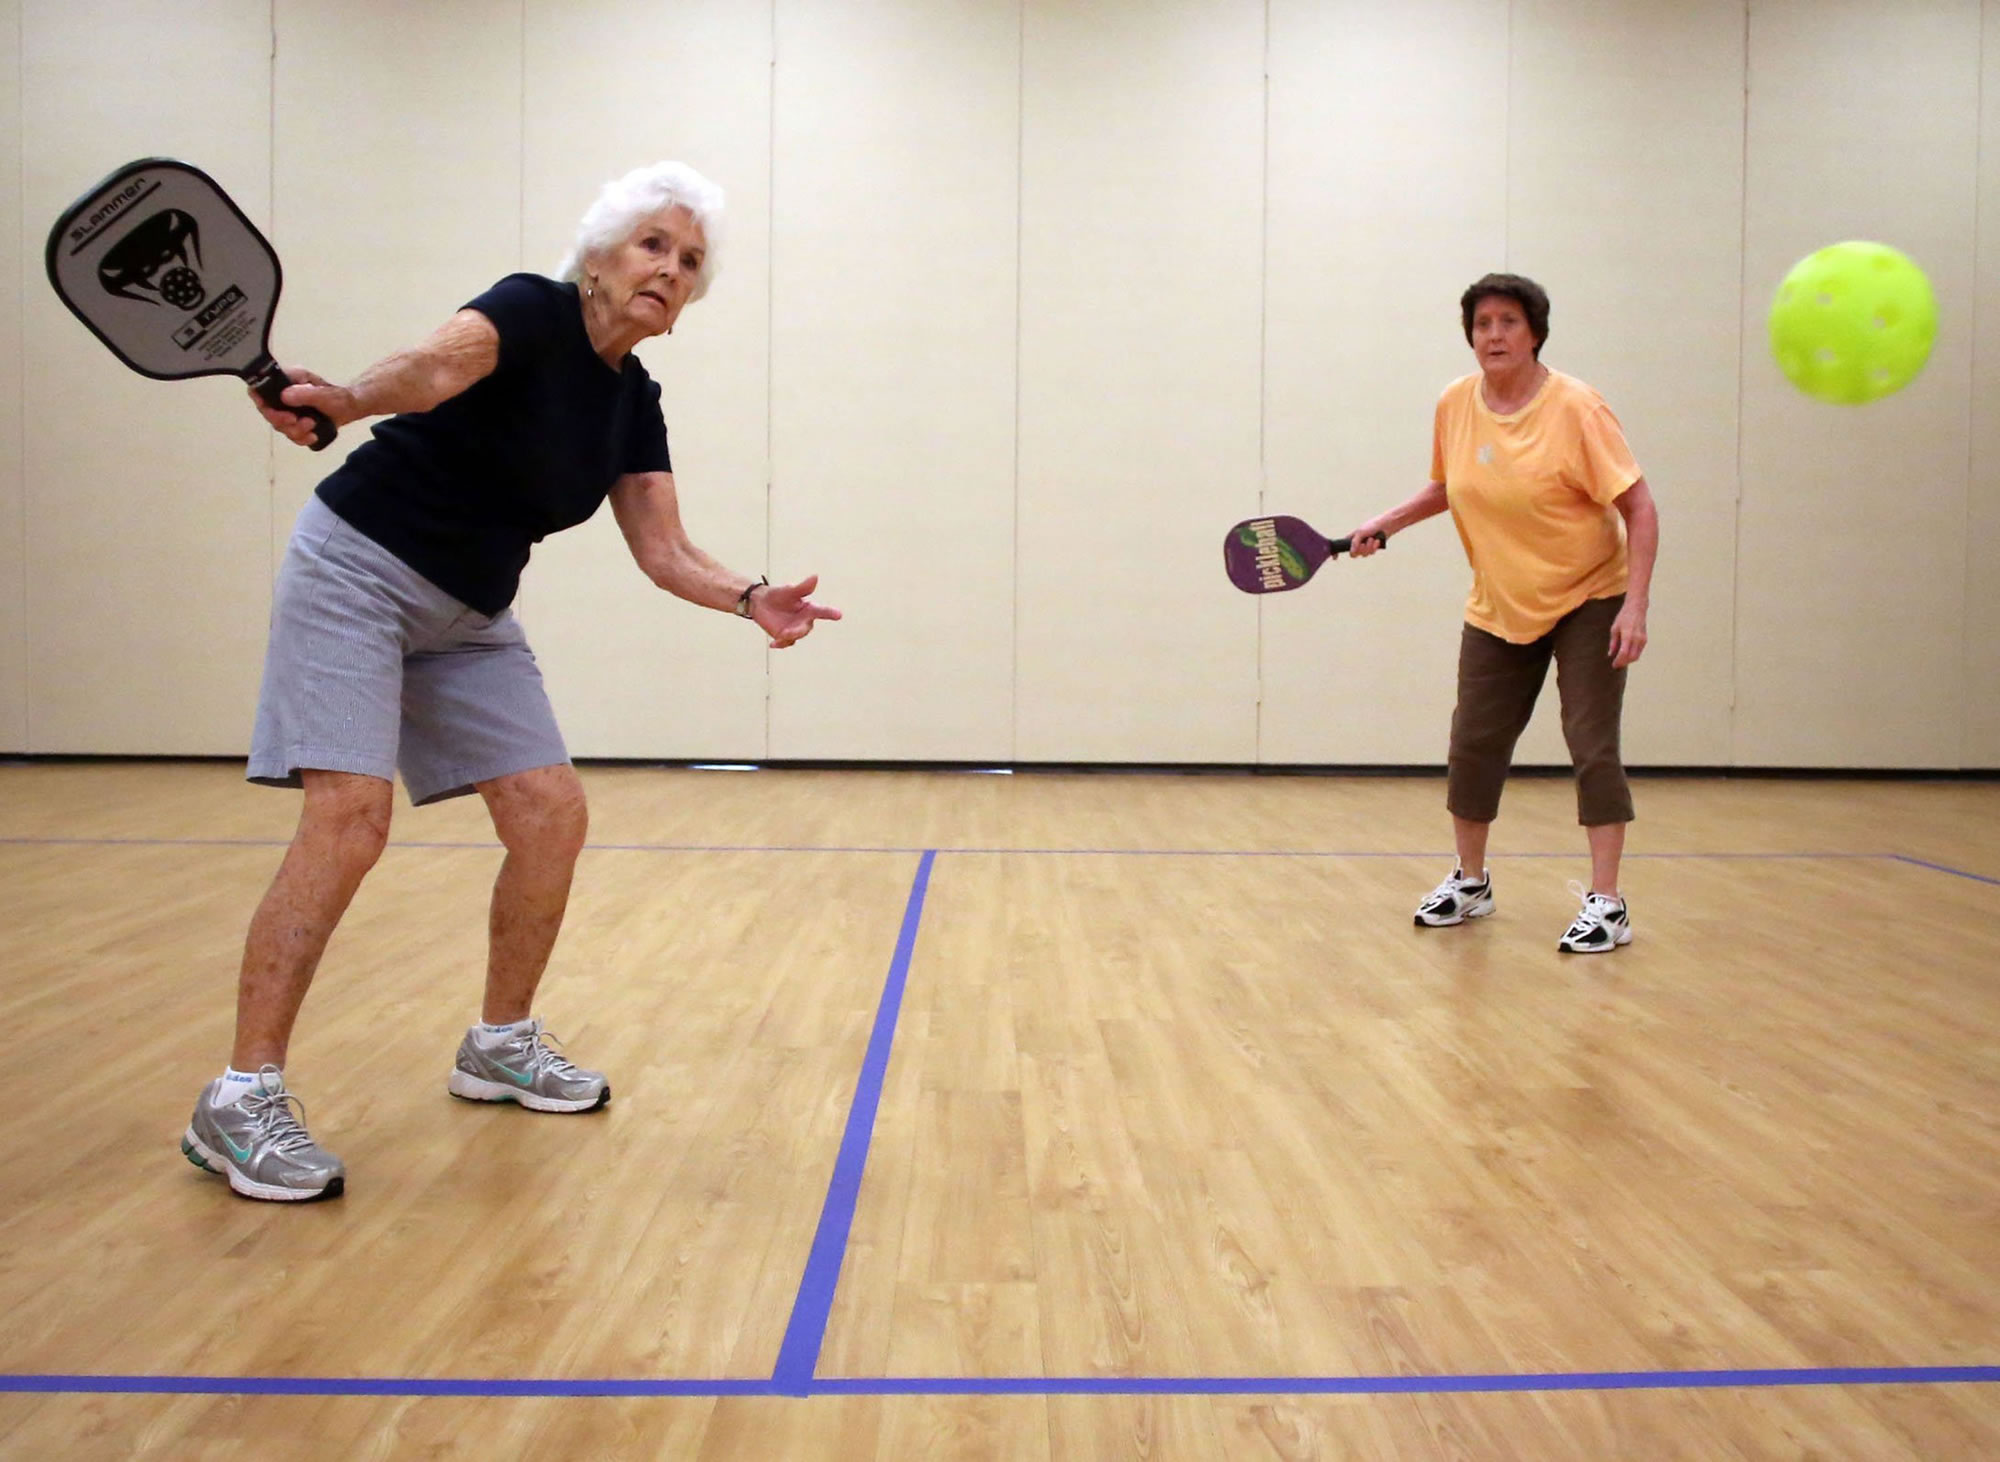 Jay Massey, left, returns a volley as her teammate Betty Bailey watches as they play pickleball Aug.